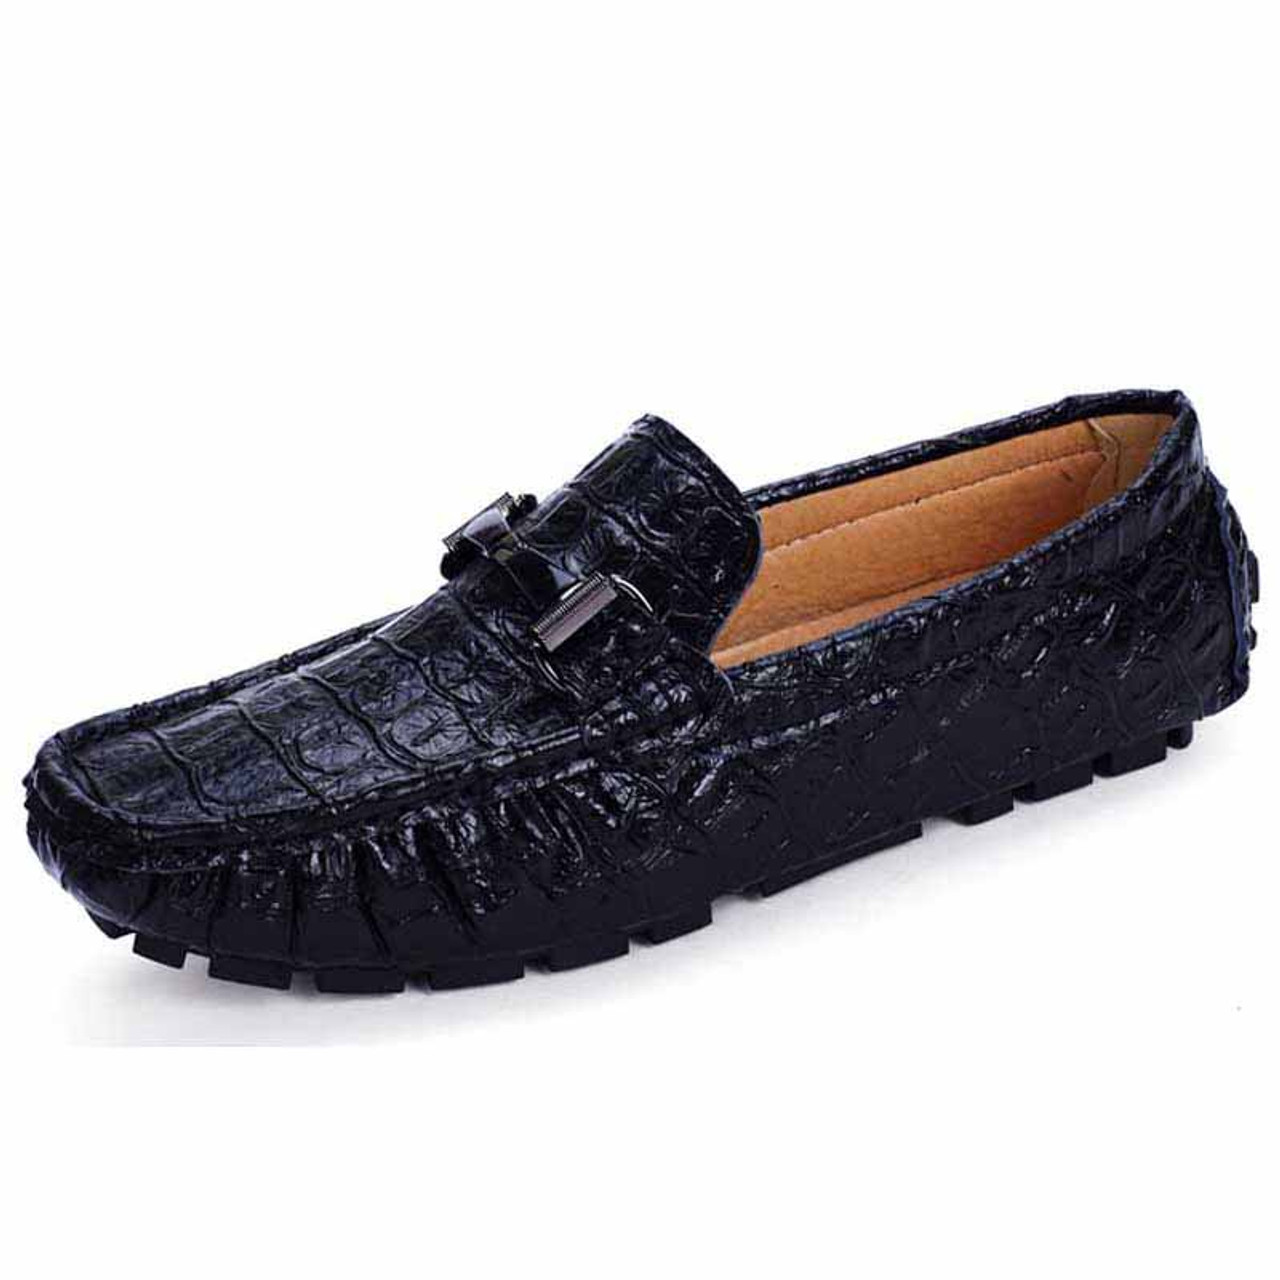 croc loafers mens